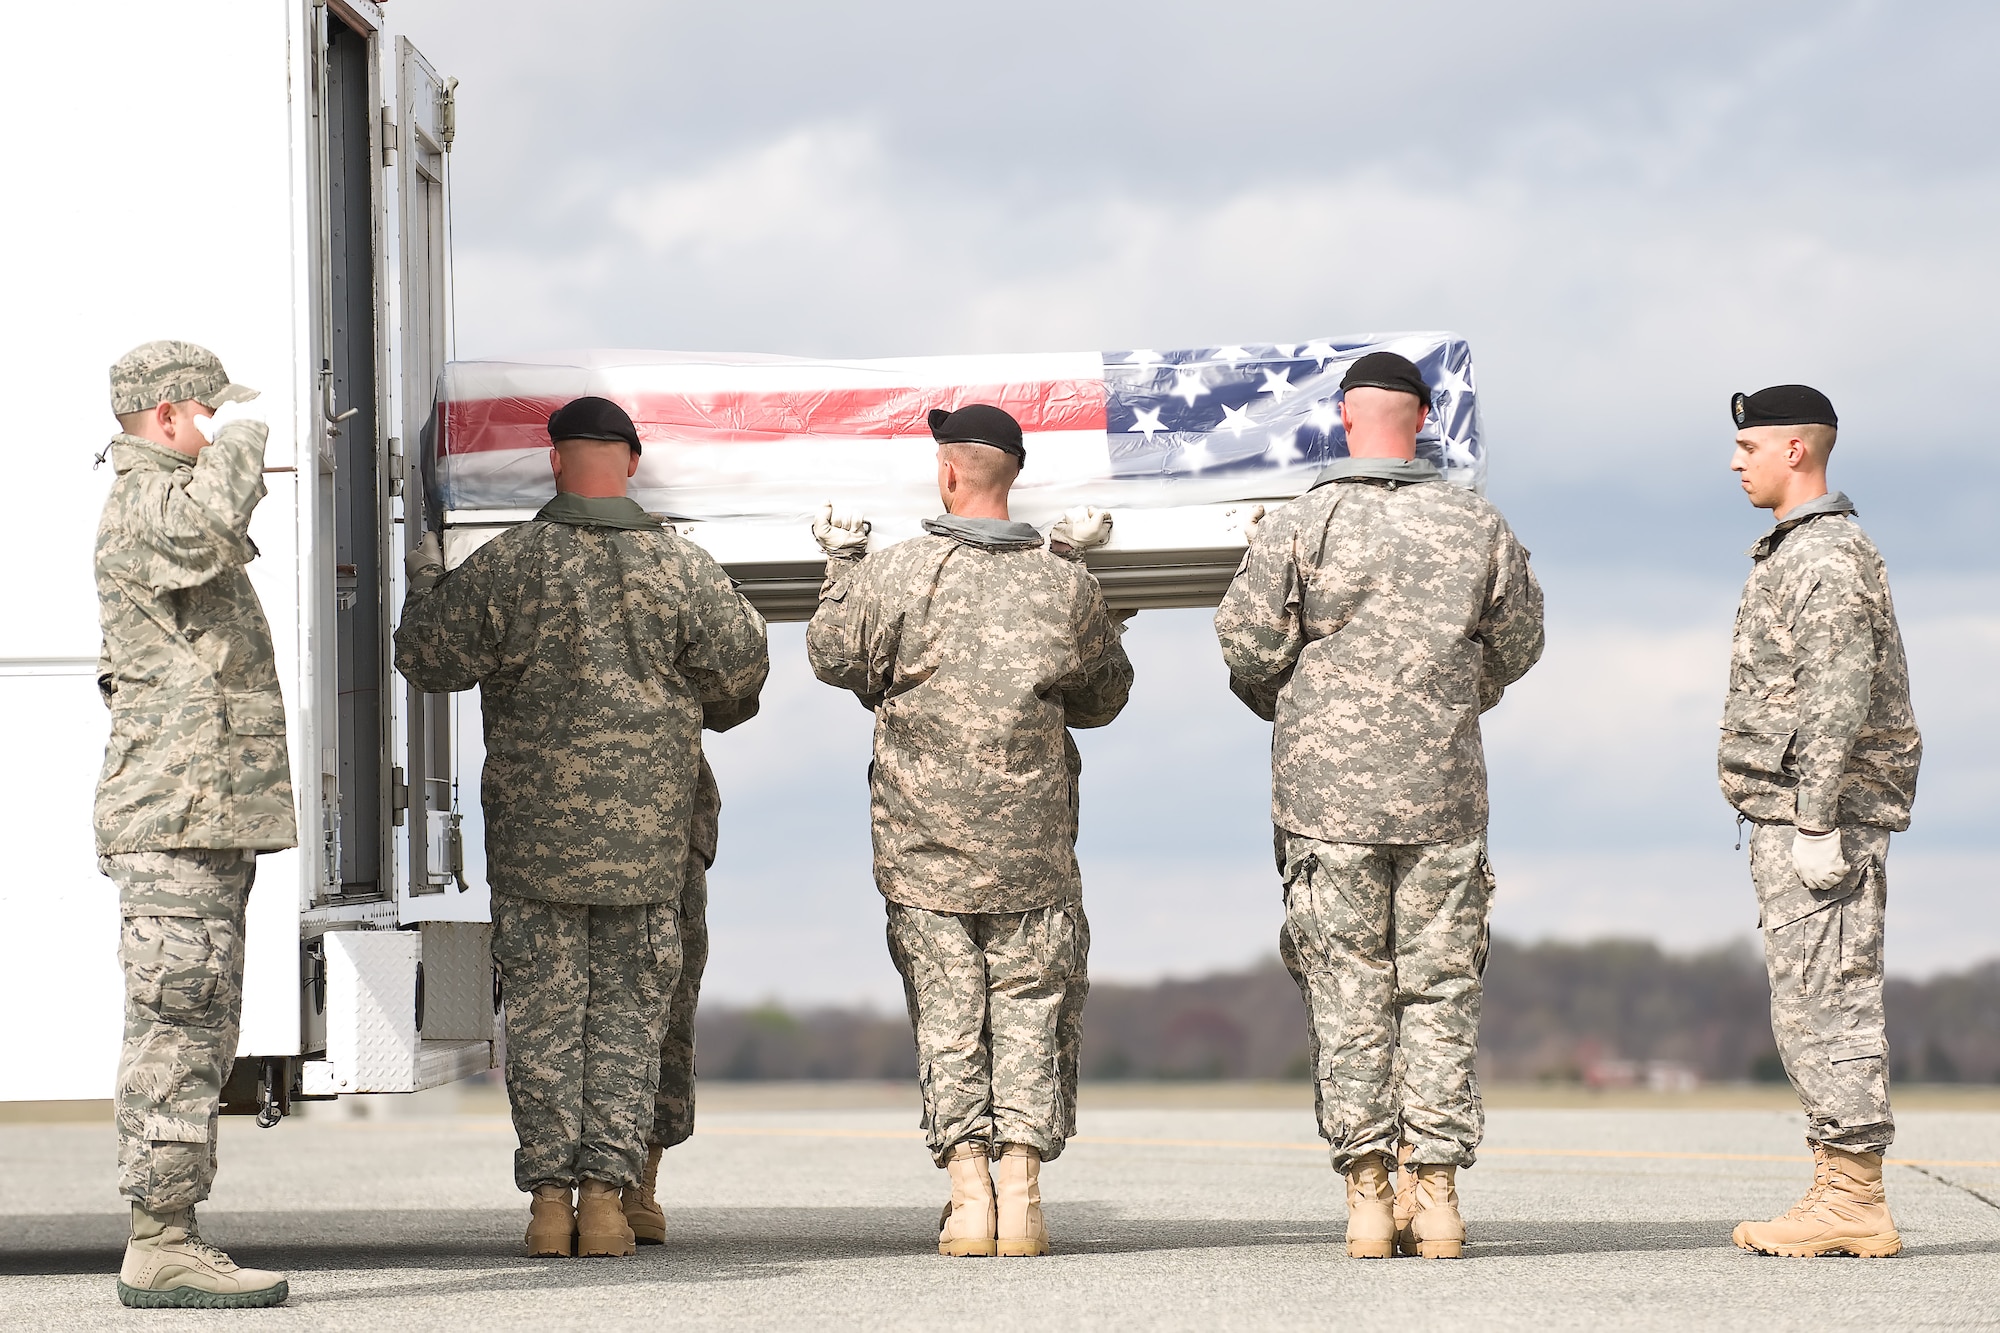 A U.S. Army carry team transfers the remains of Army Staff Sgt. Quadi S. Hudgins, of New Orleans, La., at Dover Air Force Base, Del., April 5, 2011. Hudgins was assigned to Fort Hood, Texas. (U.S. Air Force photo/Roland Balik)